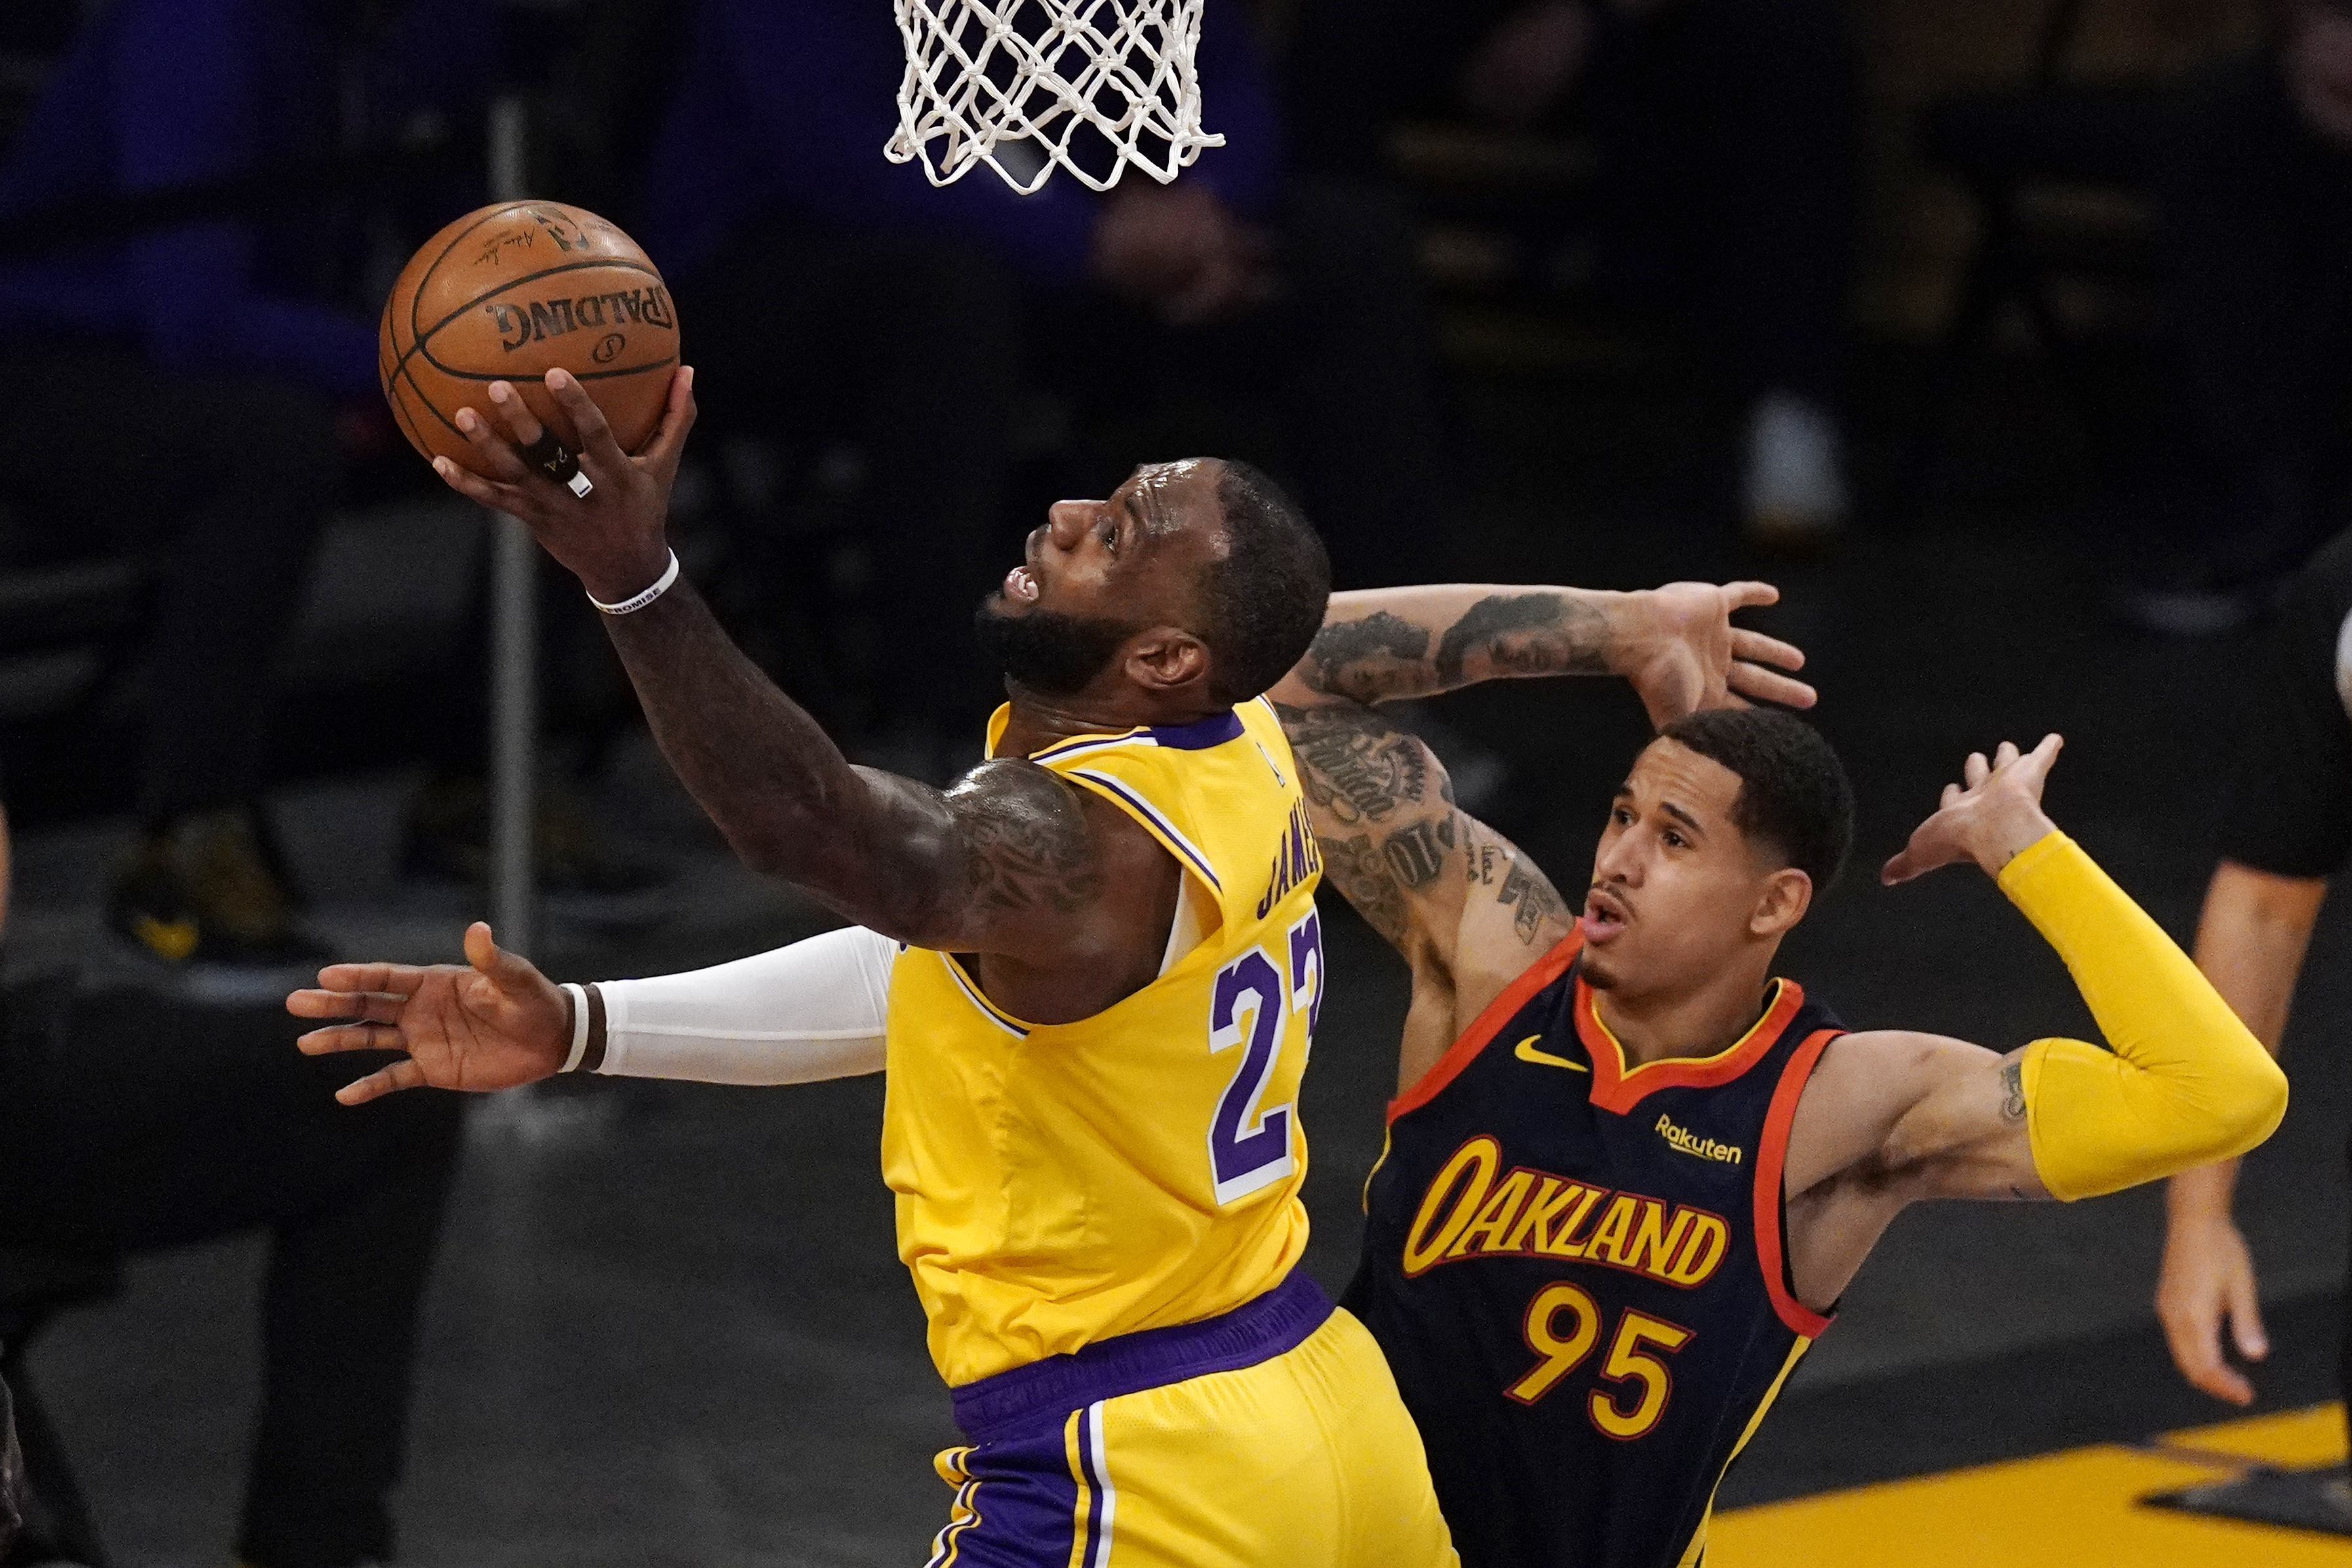 LeBron James' 56 points lead Lakers past Golden State Warriors